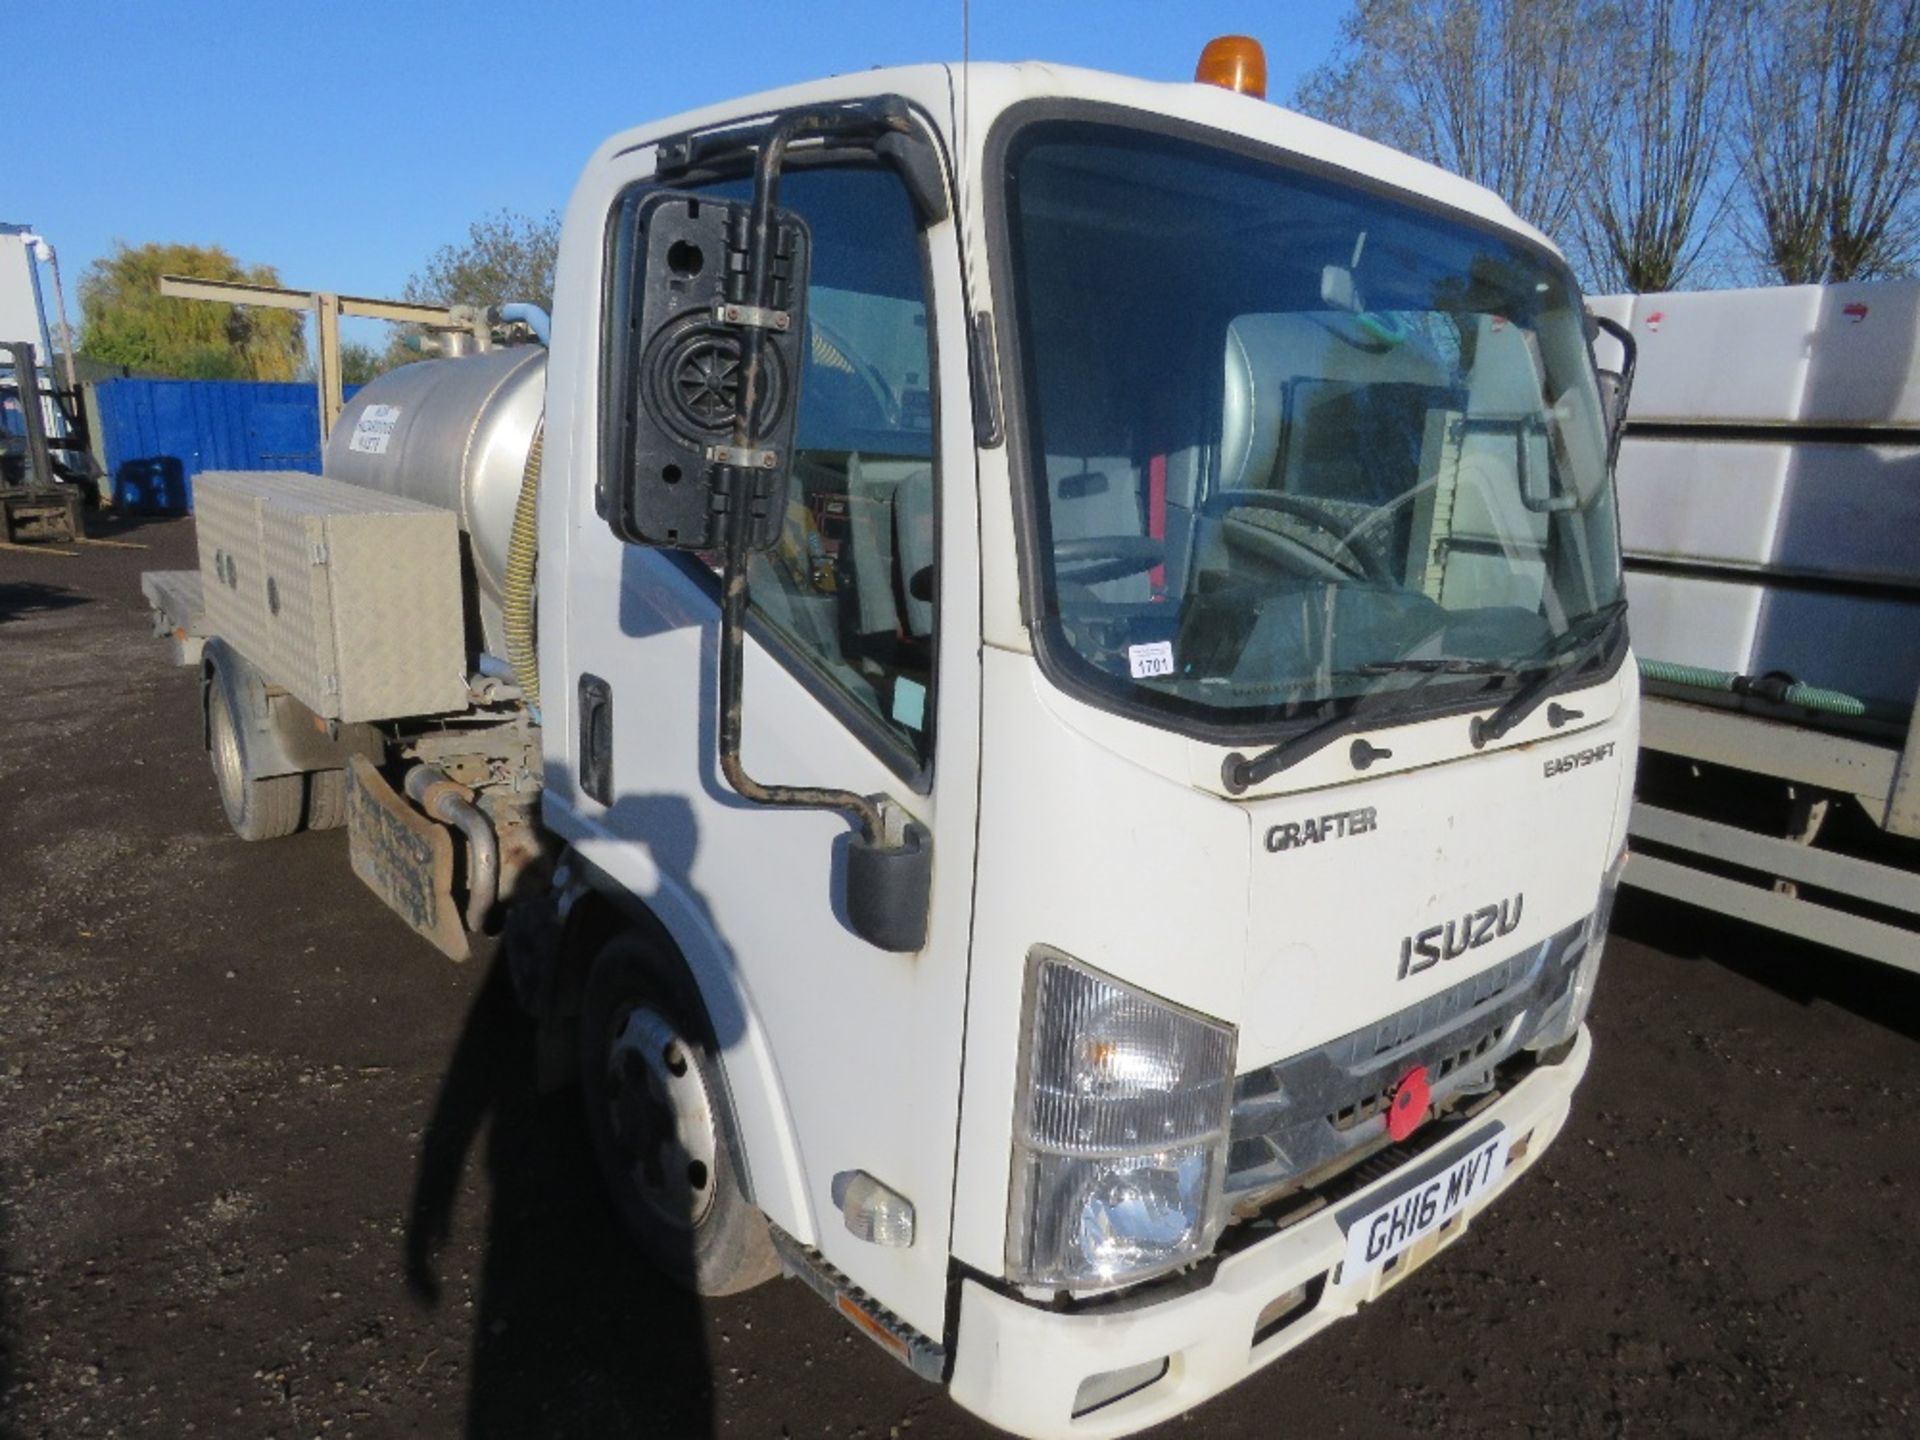 ISUZU GRAFTER 3500KG TOILET SERVICE TRUCK REG:GH16 MVT. WITH V5, OWNED FROM NEW, D.O.R:01/03/16.